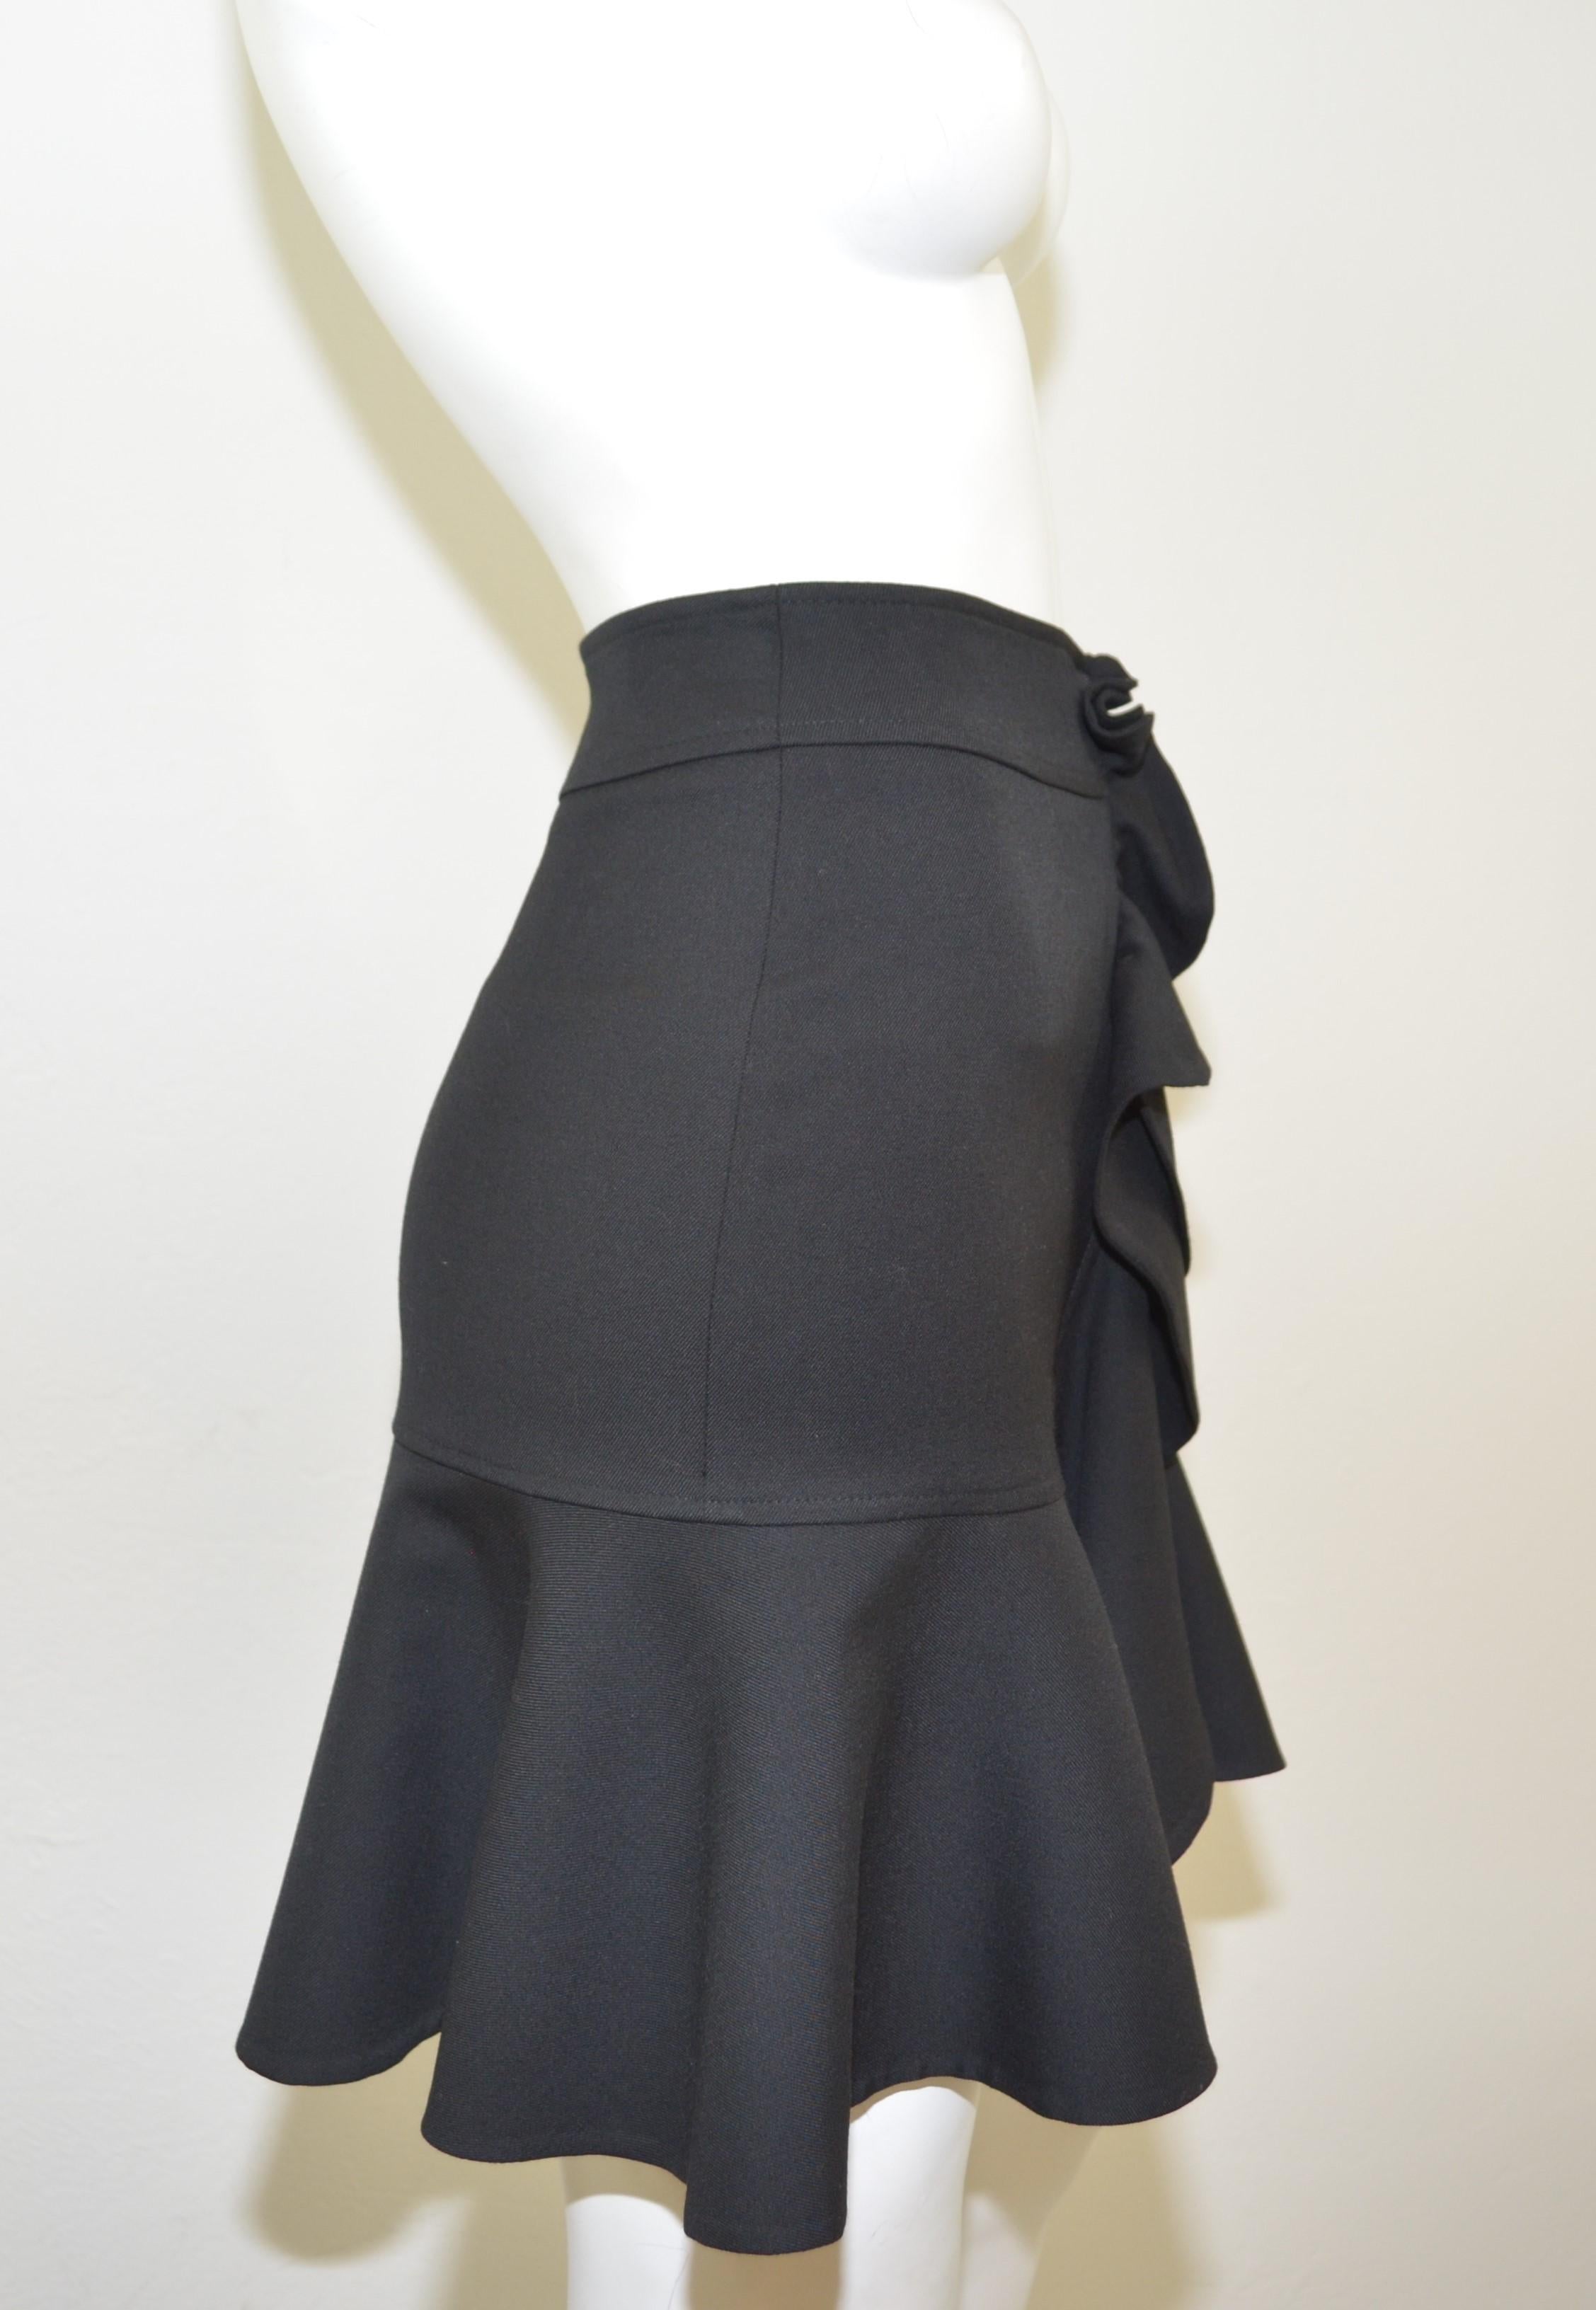 Balenciaga black mini skirt has a ruffled front detail and a fluted/flared hem with a side zipper closure. Skirt is a size 38, made in Italy. 99% wool & 1% silk.

Waist 28''
Hips 34''
Length 19''